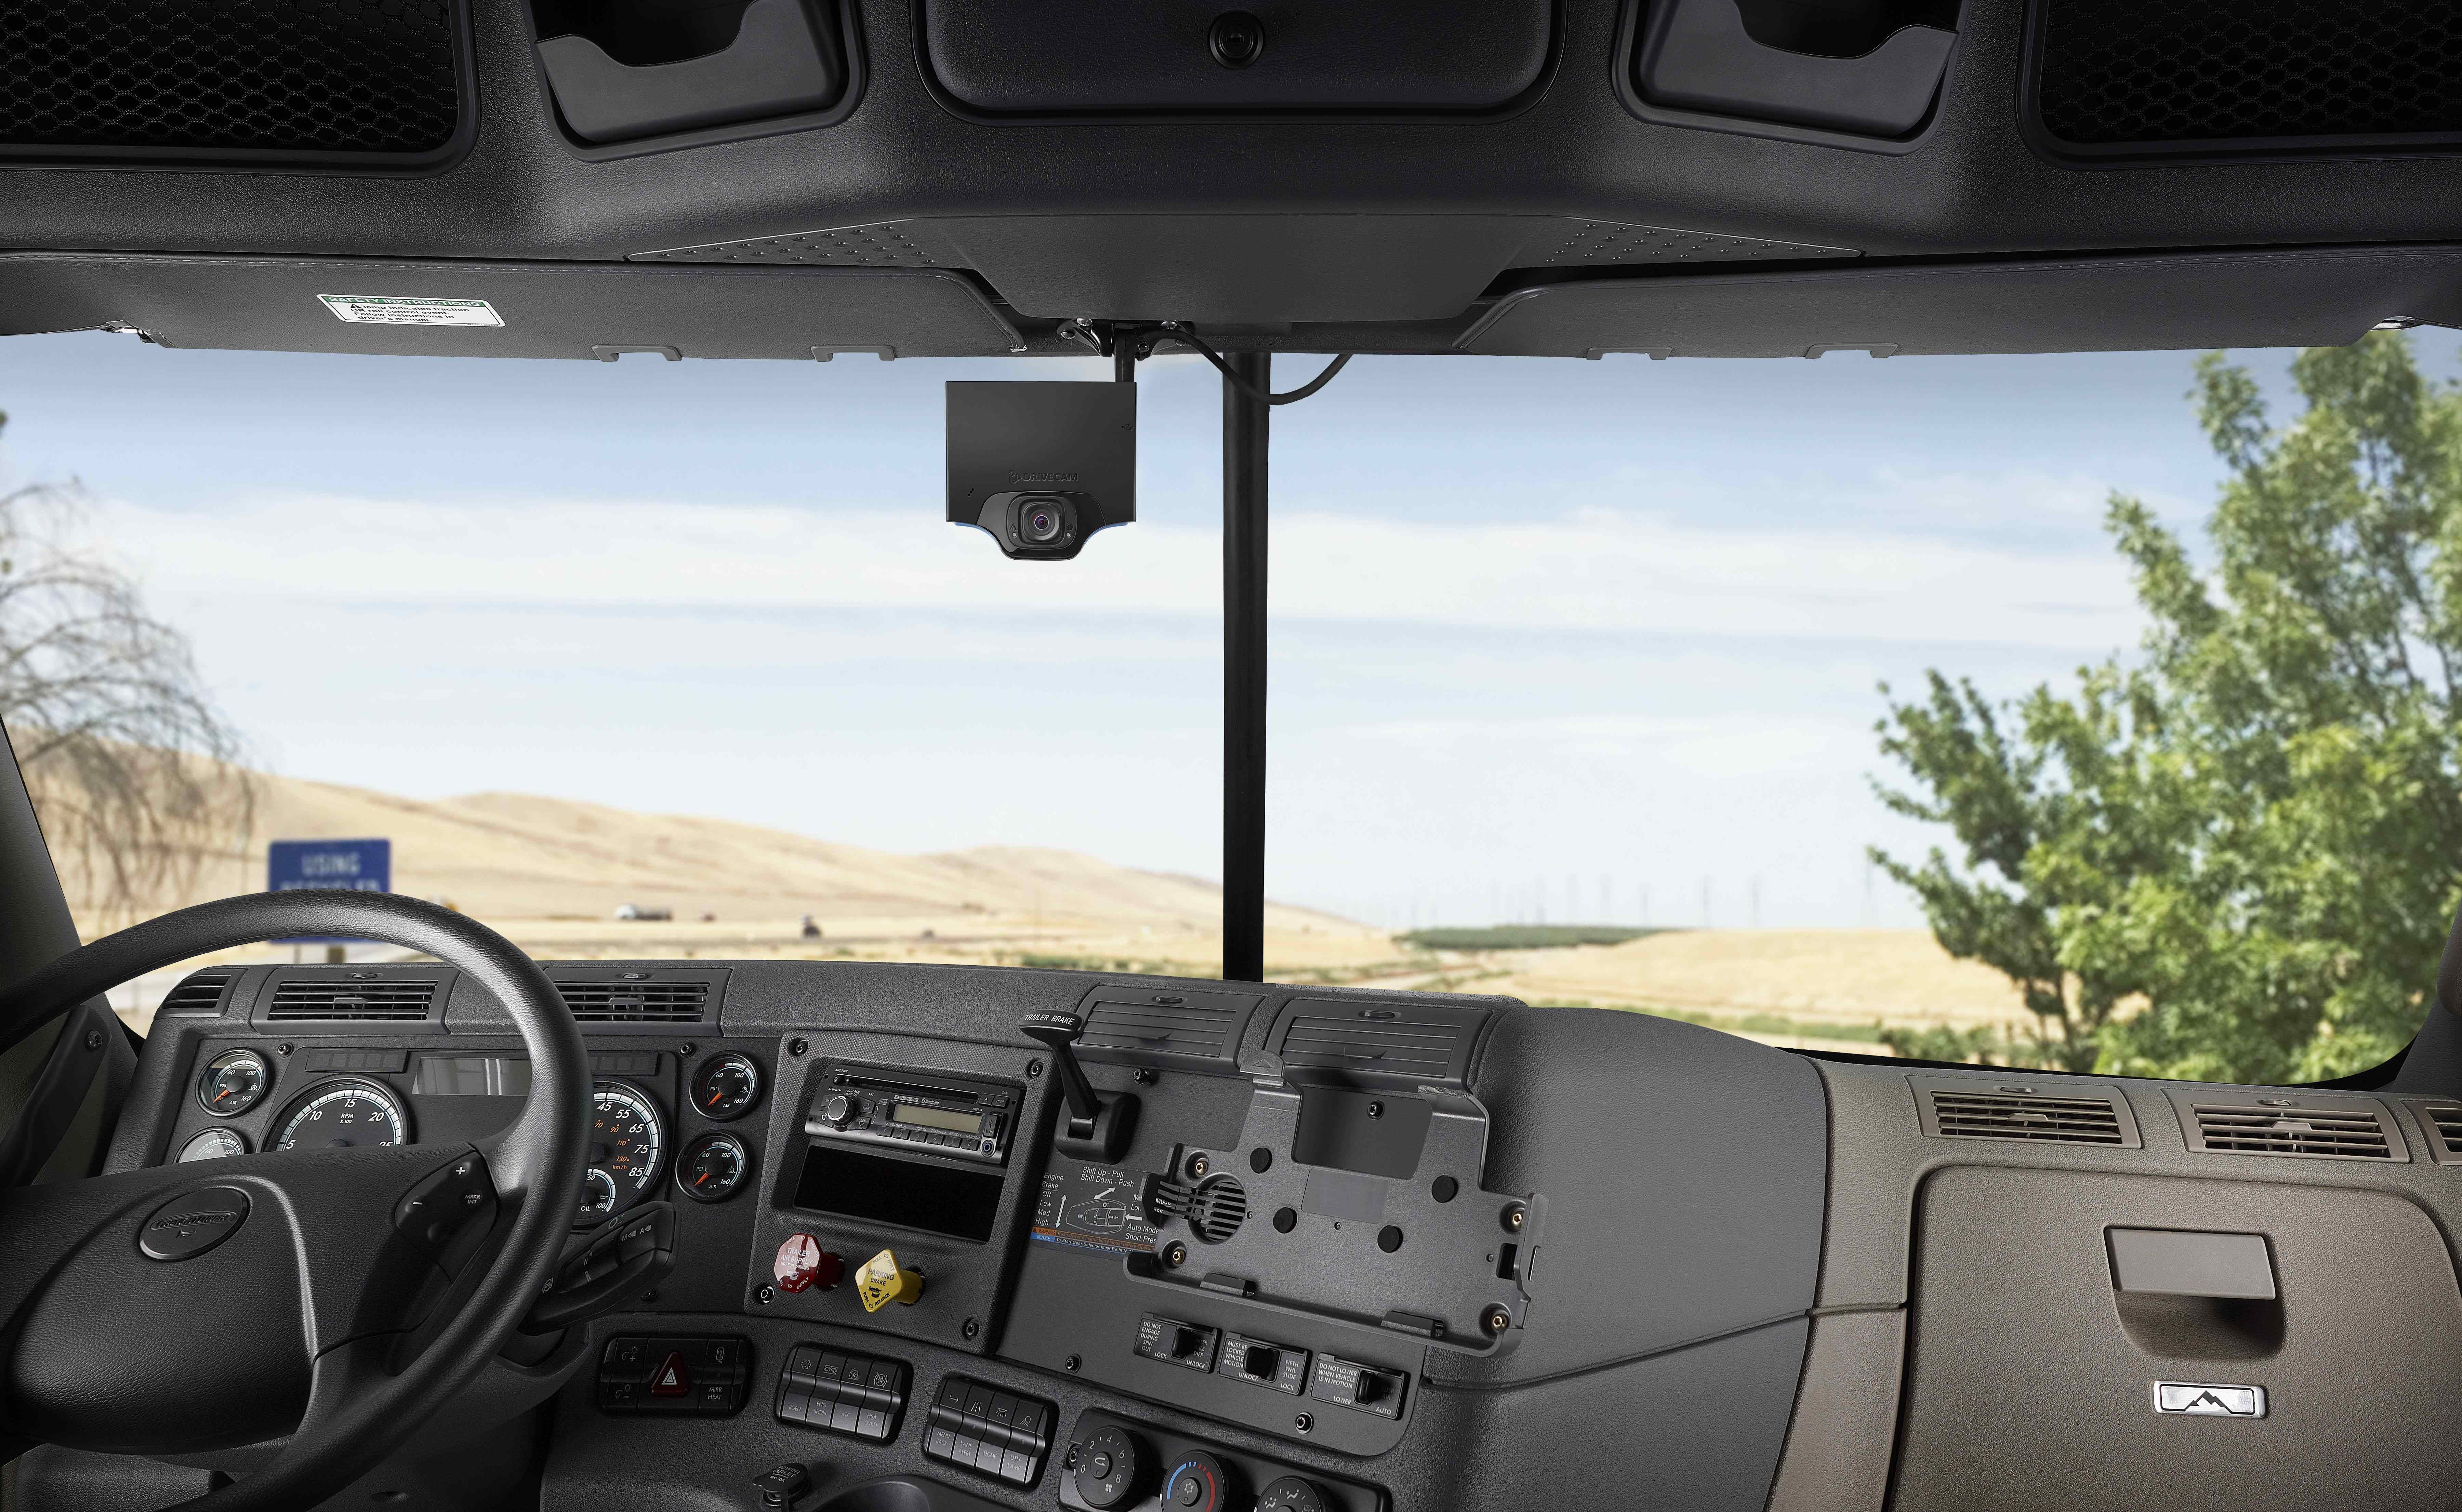 Ryder System, Inc. - Ryder Adds DriveCam Technology to Take Safety to New  Heights